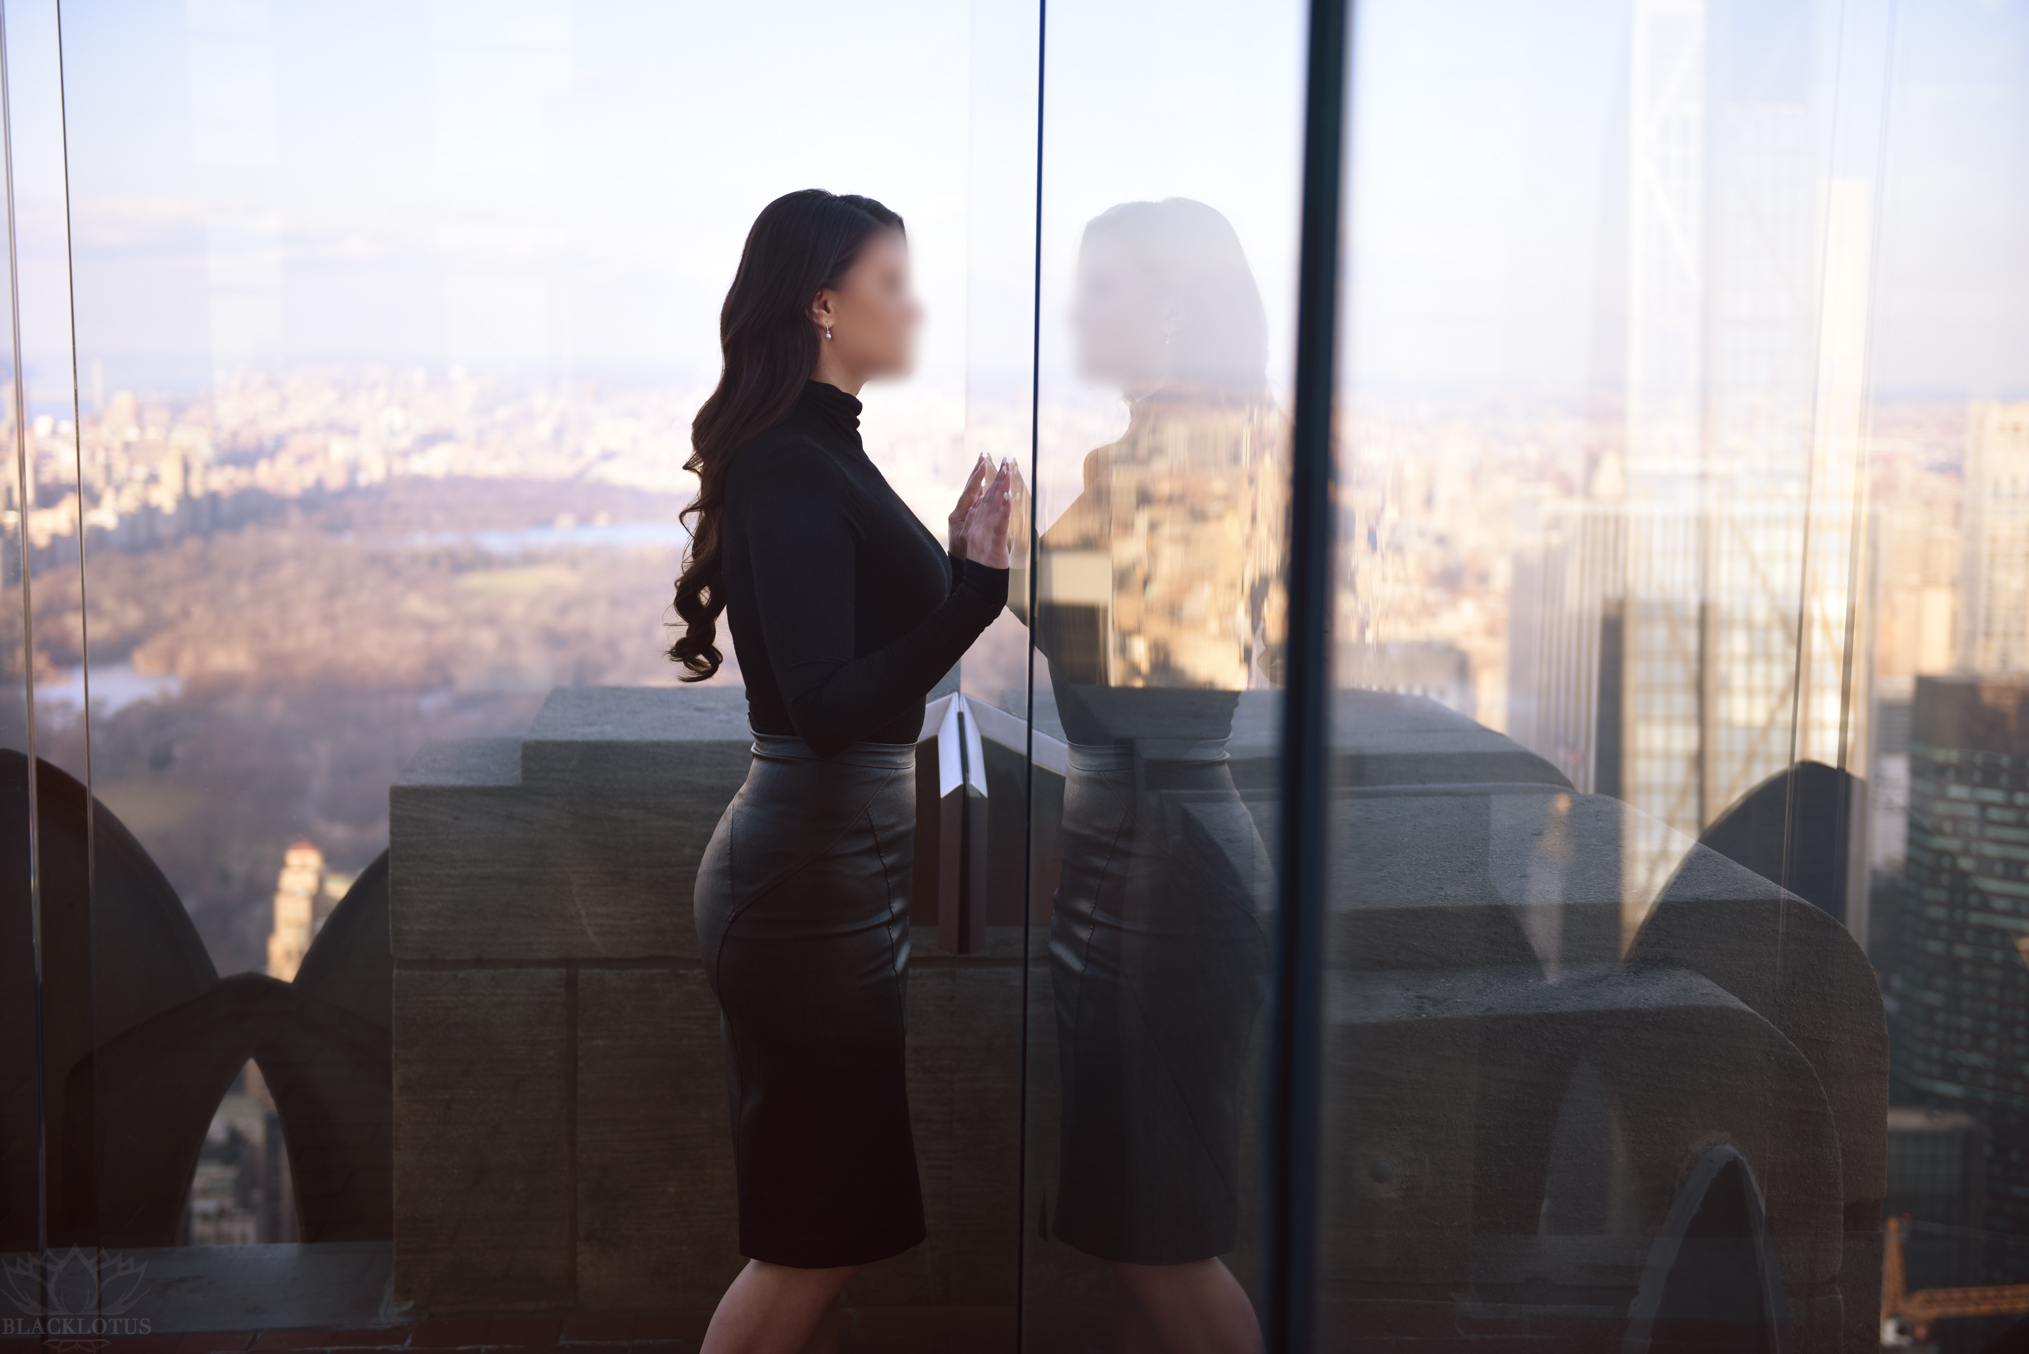 A beautiful brunette woman wearing a tight leather skirt and a black blouse stands next to a window facing her own reflection. In the distance, you can see Central Park and Manhattan.